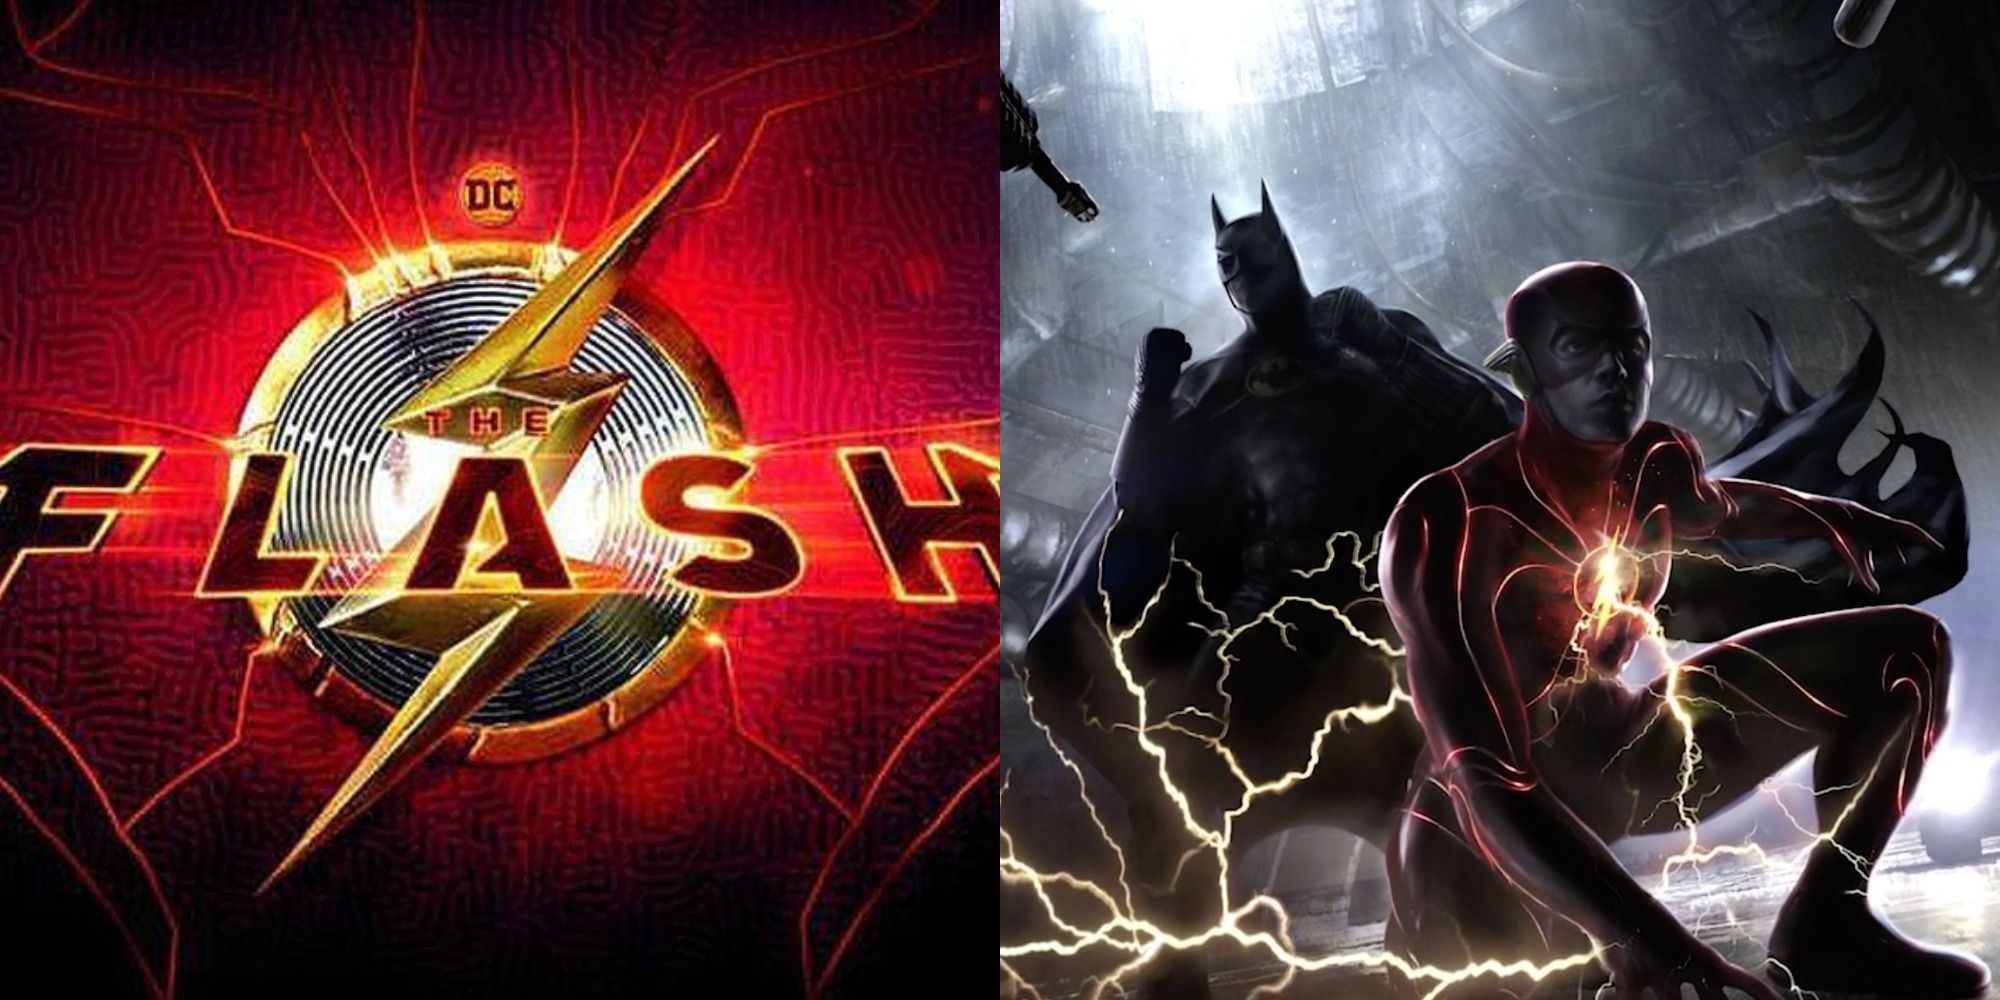 Split image showing the poster for The Flash and artwork showing Flash and Batman